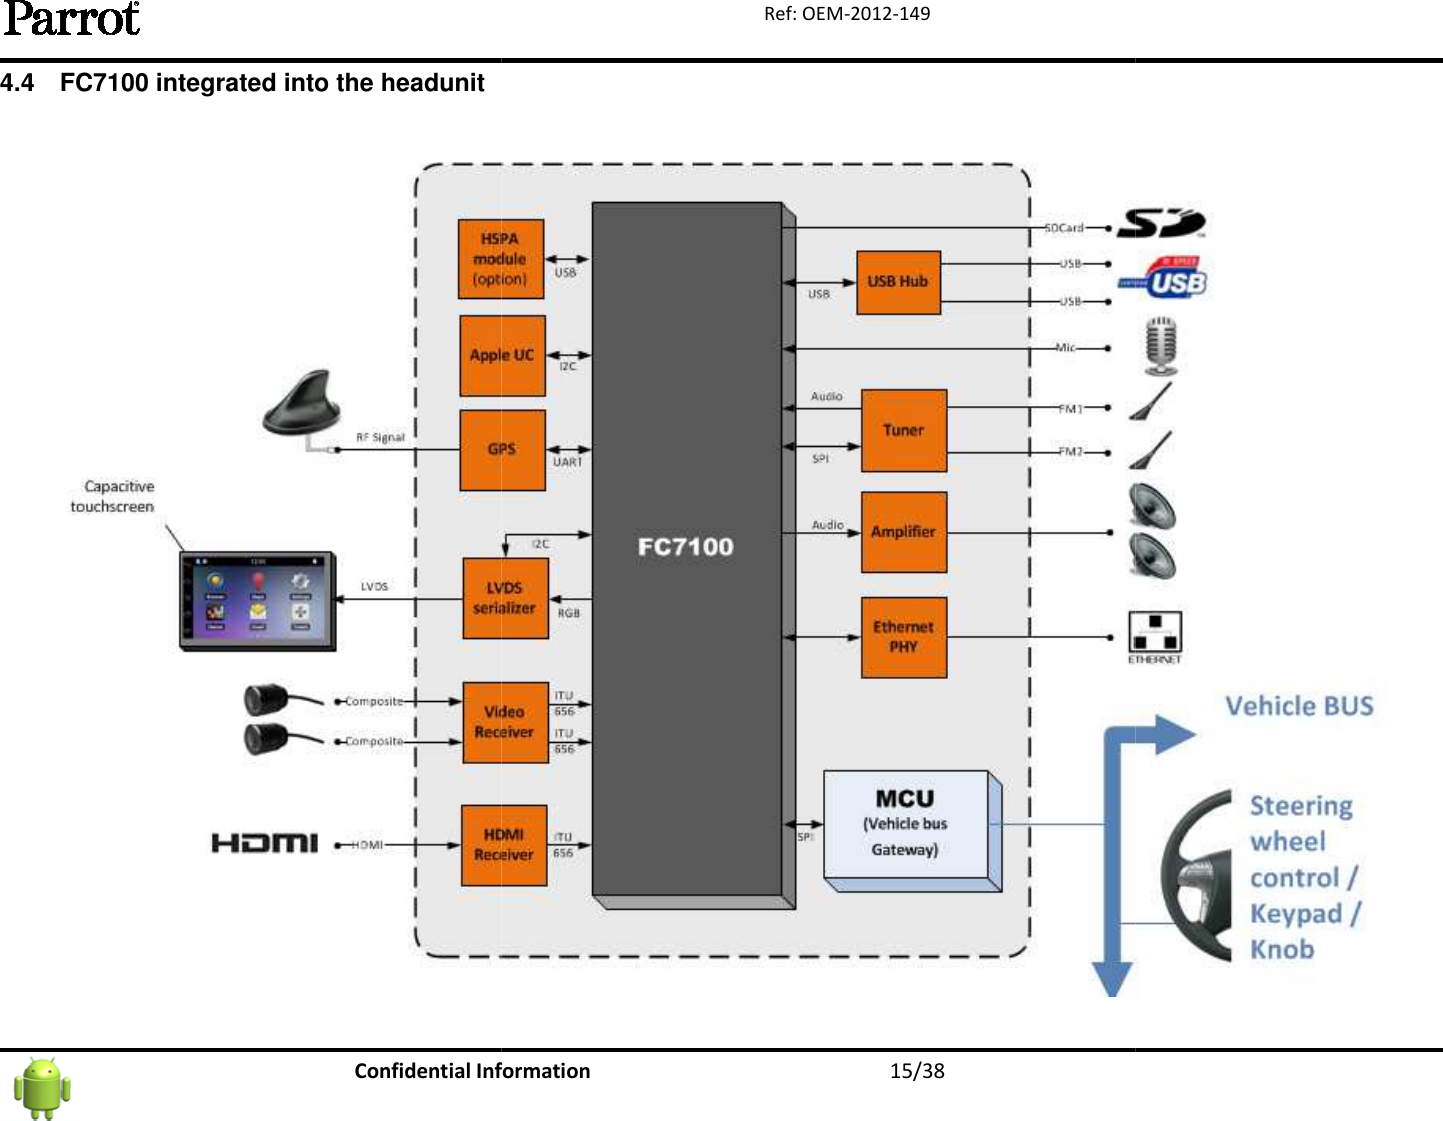   Confidential Information4.4  FC7100 integrated into the headunit Information 15/38 Ref: OEM-2012-149     